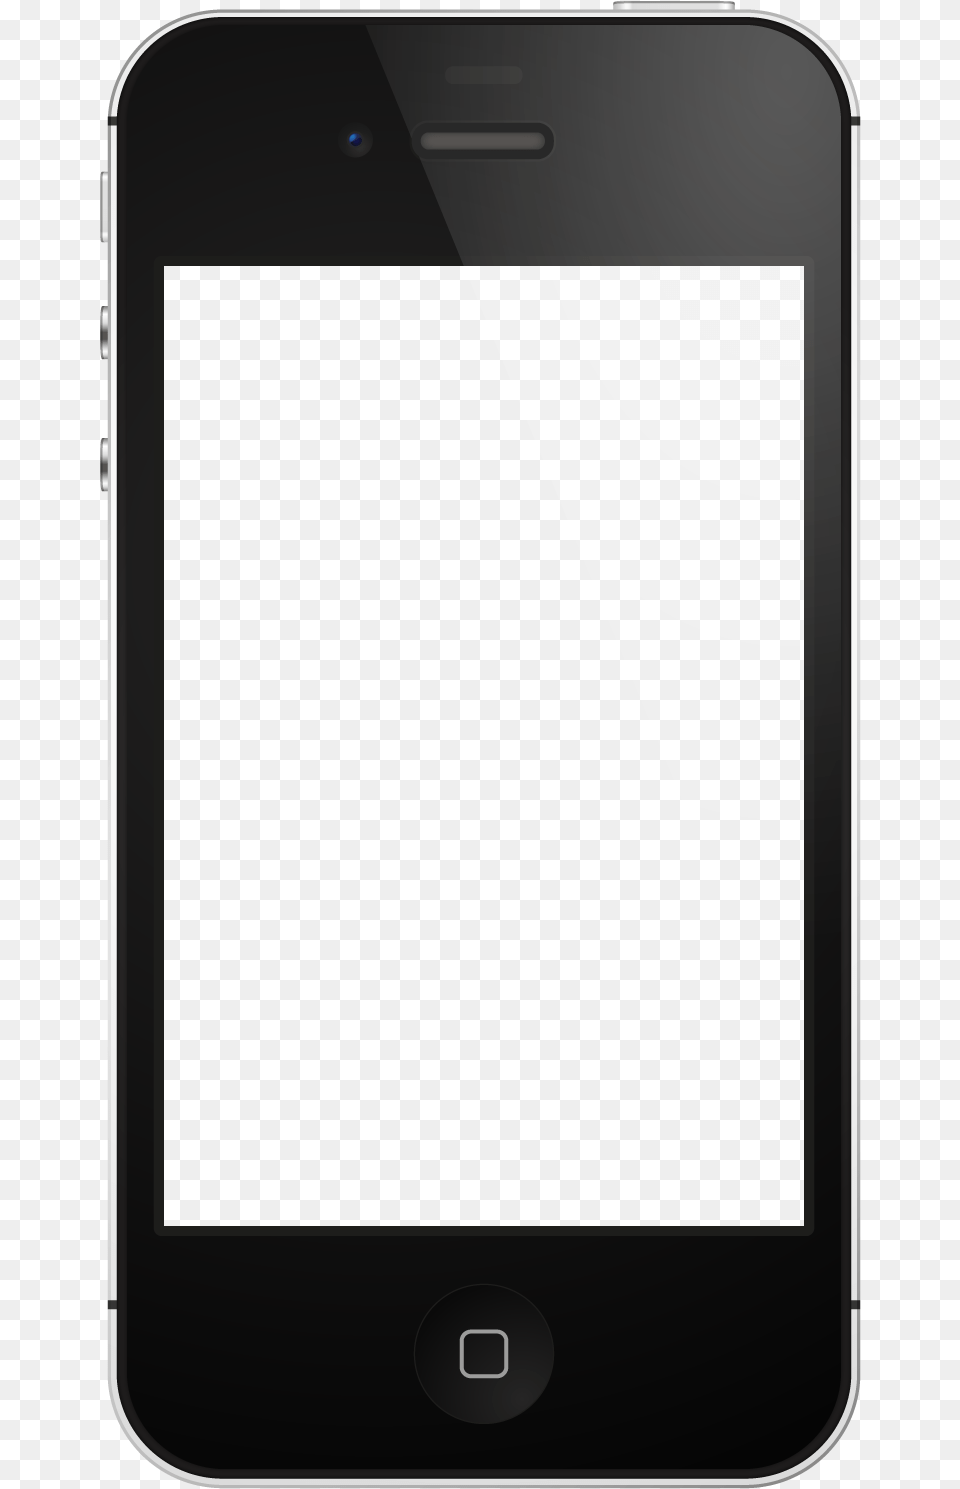 Iphone Template Blank App Screen Iphone, Electronics, Mobile Phone, Phone Png Image